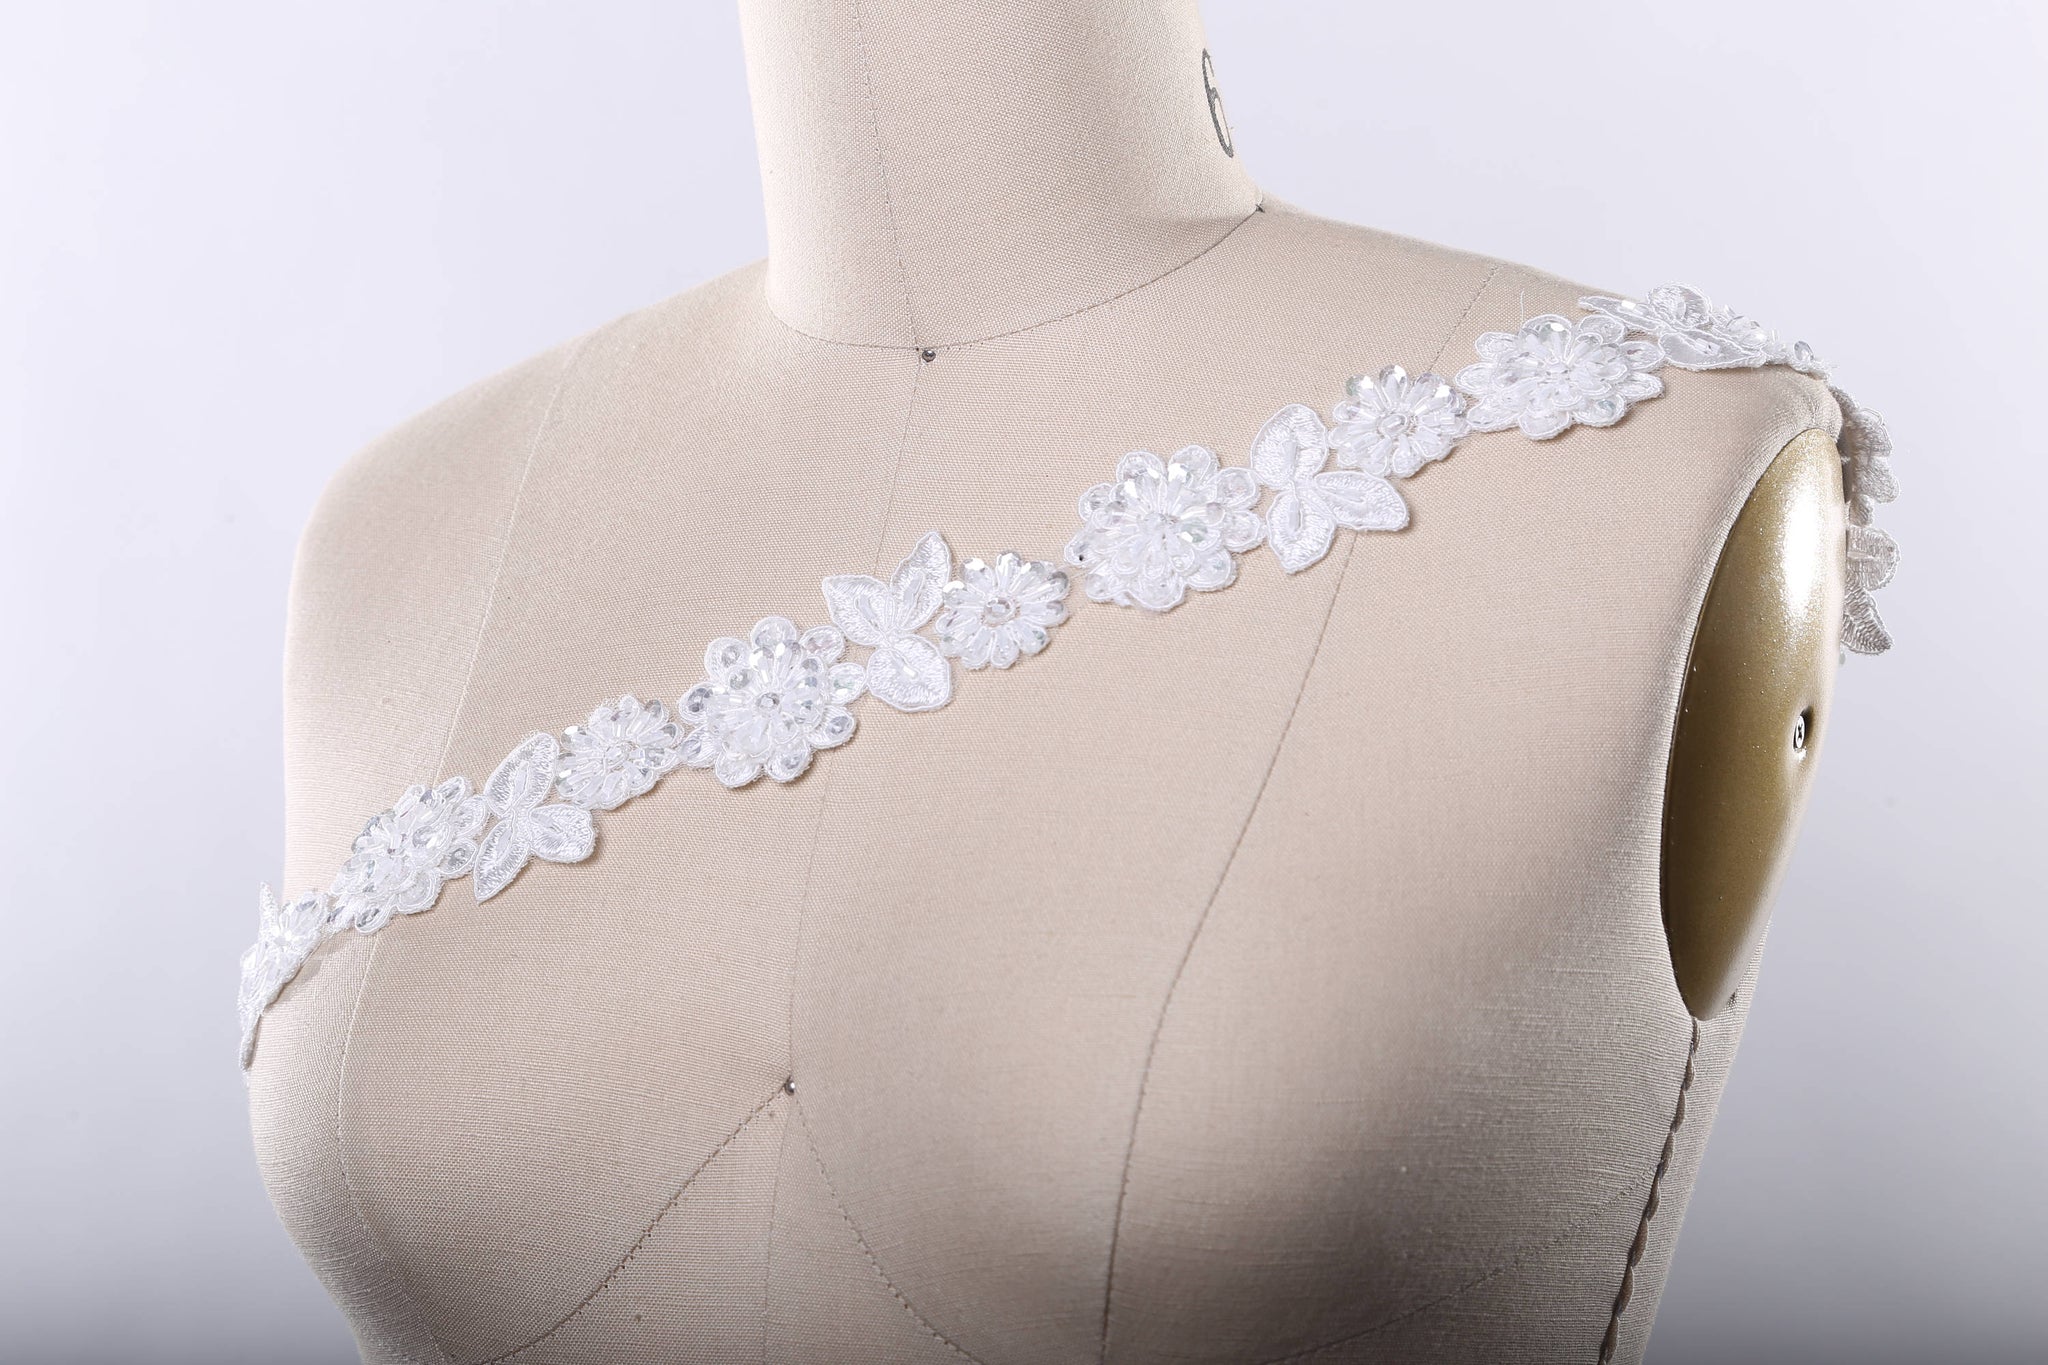 18" White or Ivory Lace Trim with Beaded 3D Flower and Leaf